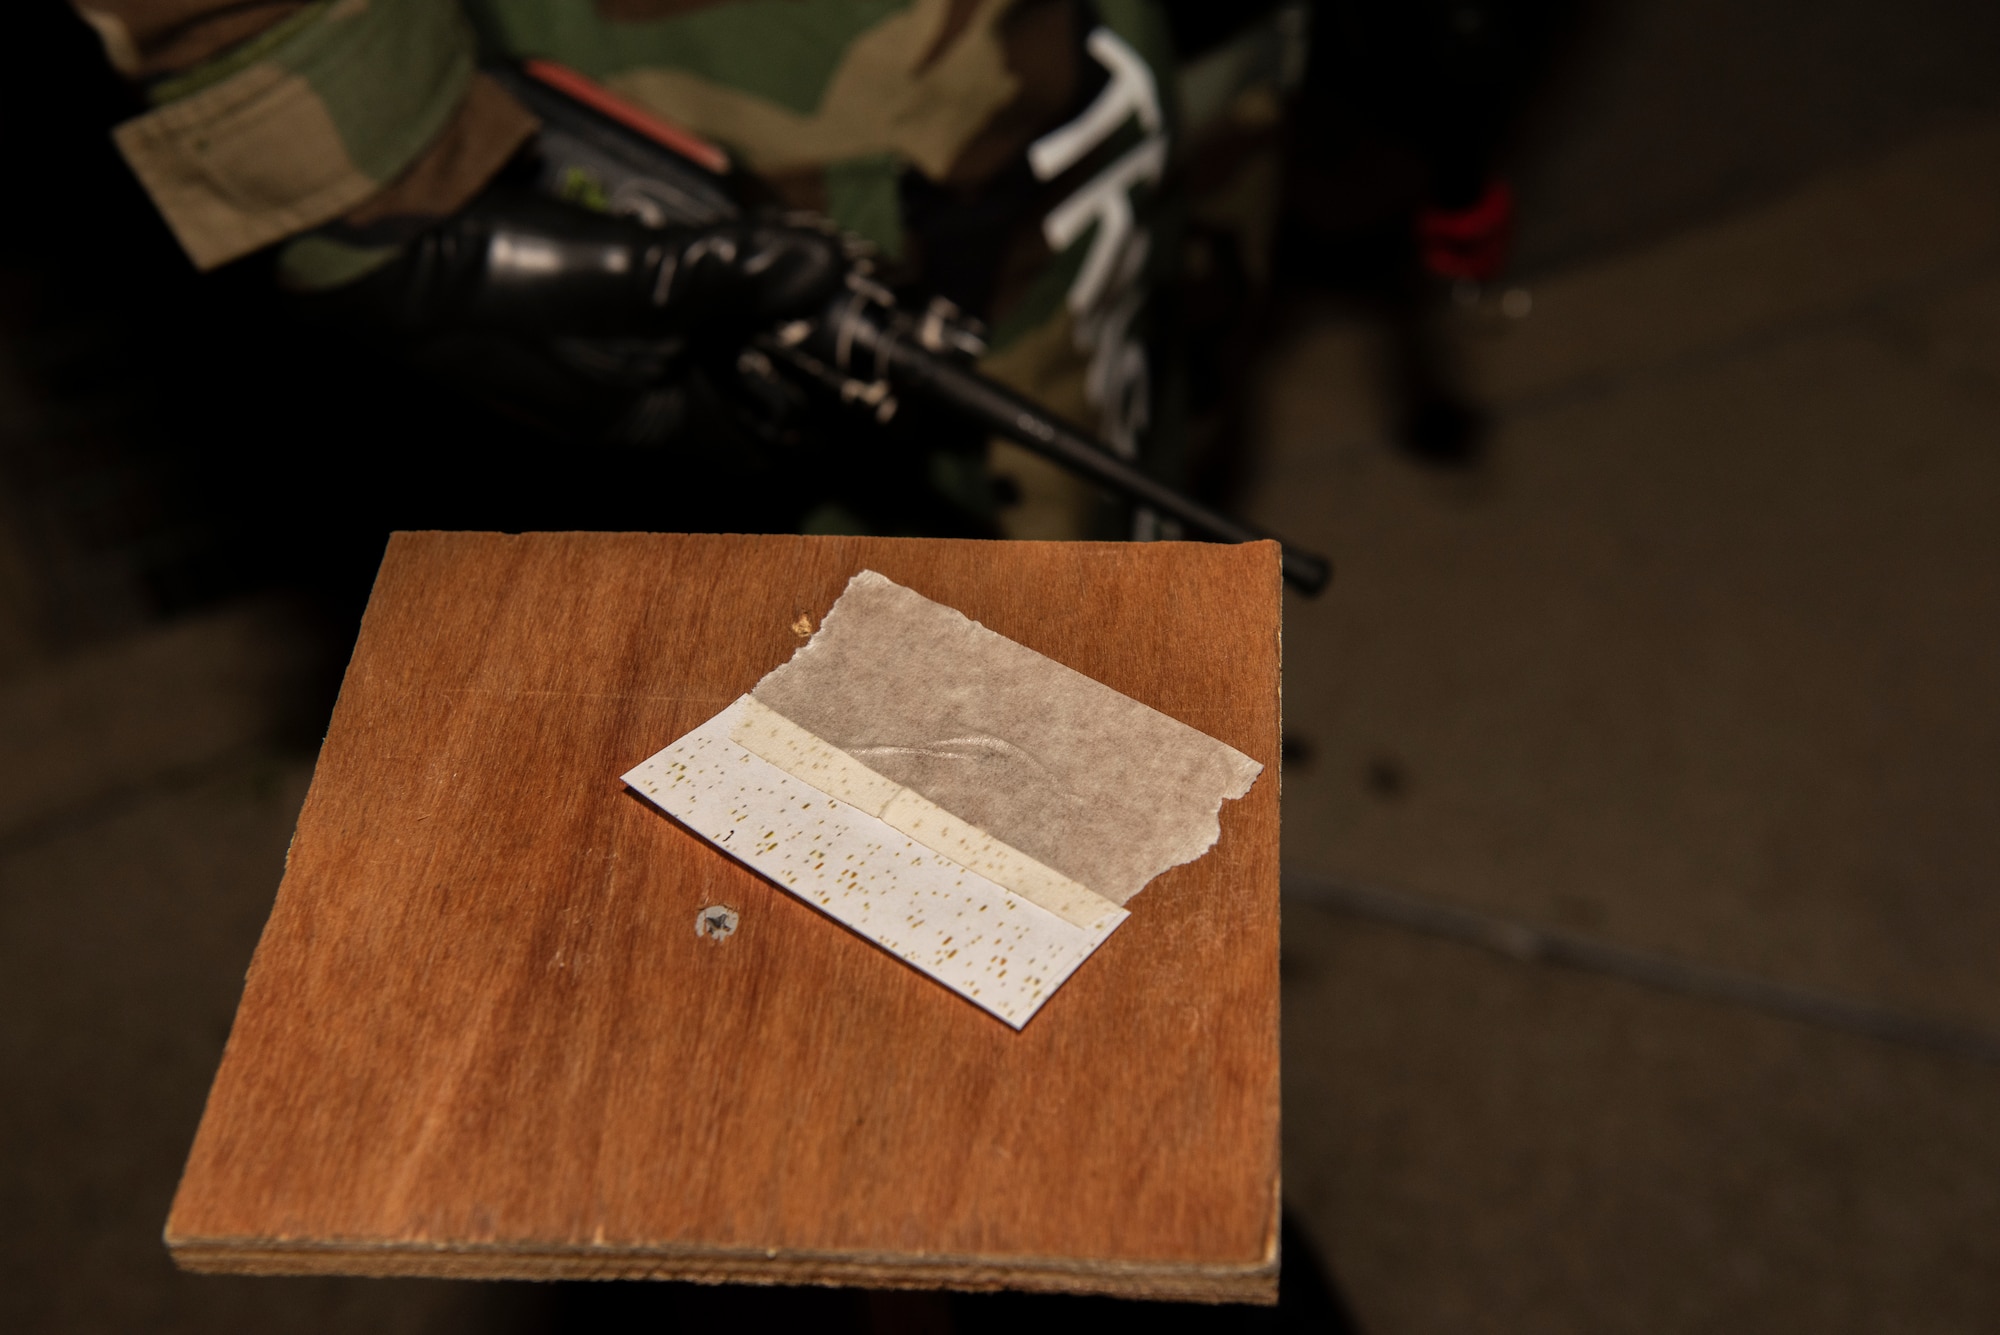 M9 paper shows the presence of simulated chemicals during a post attack reconnaissance (PAR) sweep as part of a training event at Osan Air Base, Republic of Korea, Aug. 16, 2022.